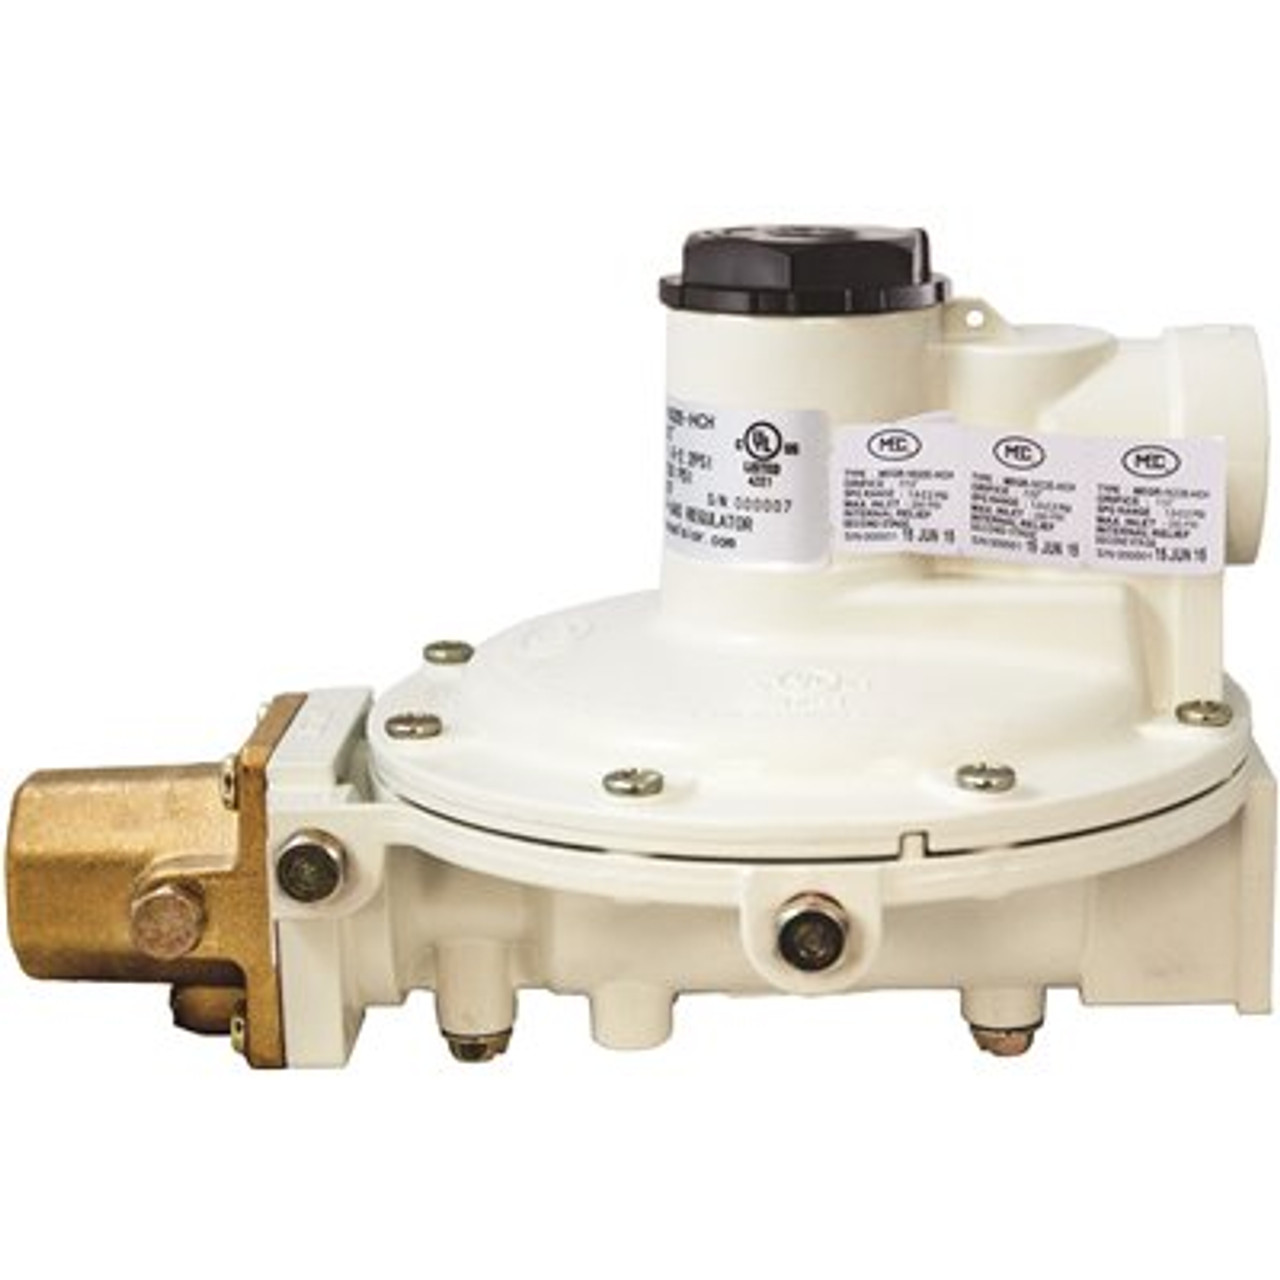 Excela-Flo Full Size Twin Stage Regulator, F. POL Inlet x 3/4 in. FNTP Outlet, 2 psi